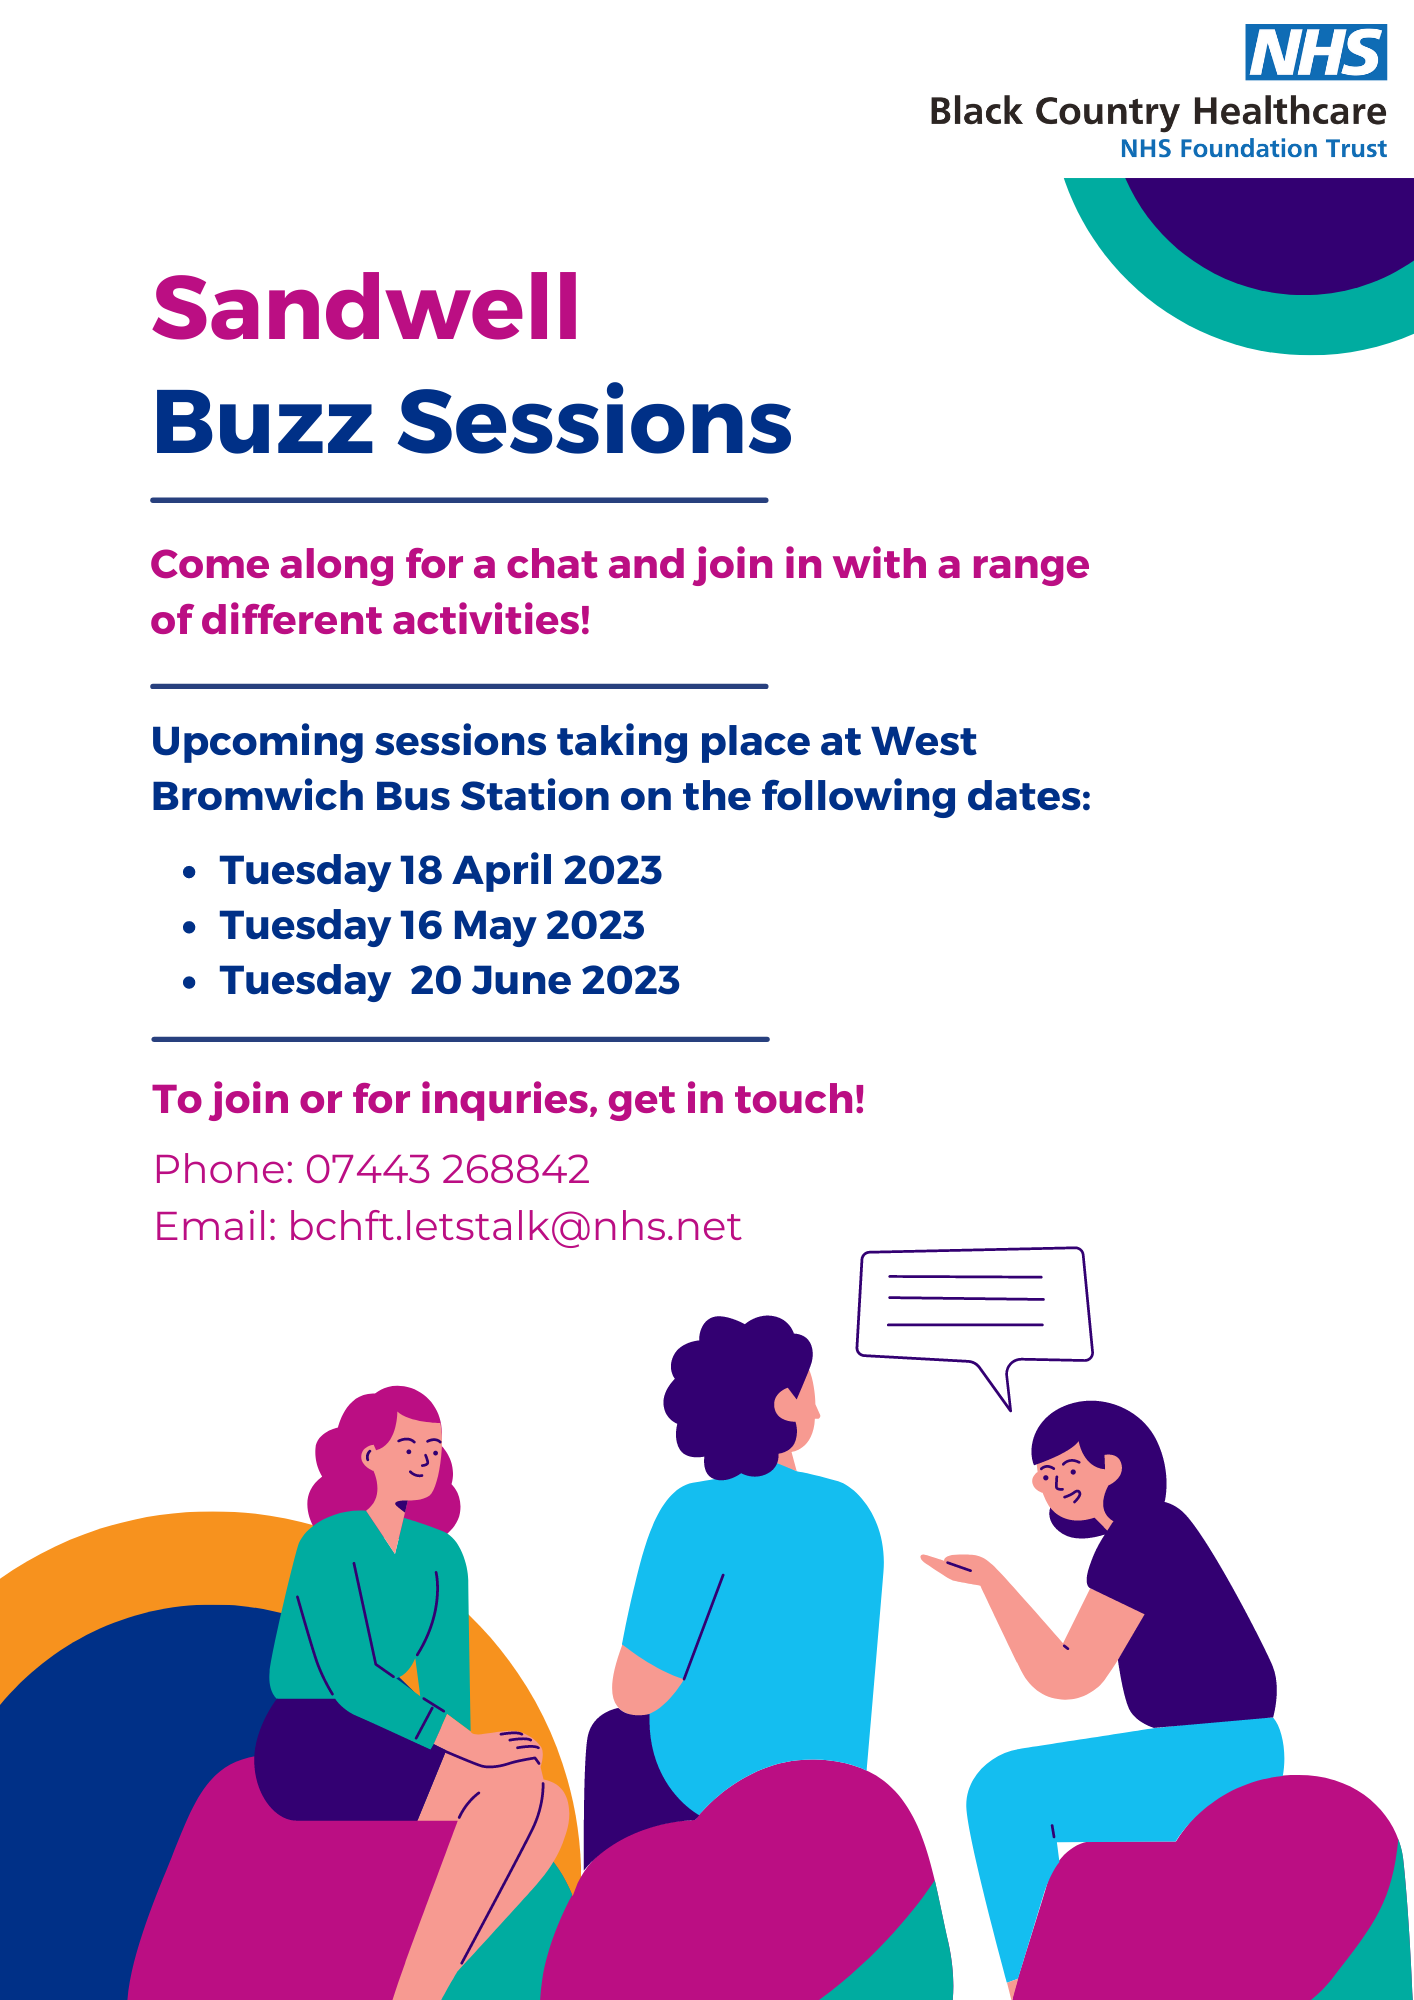 Sandwell Buzz Sessions